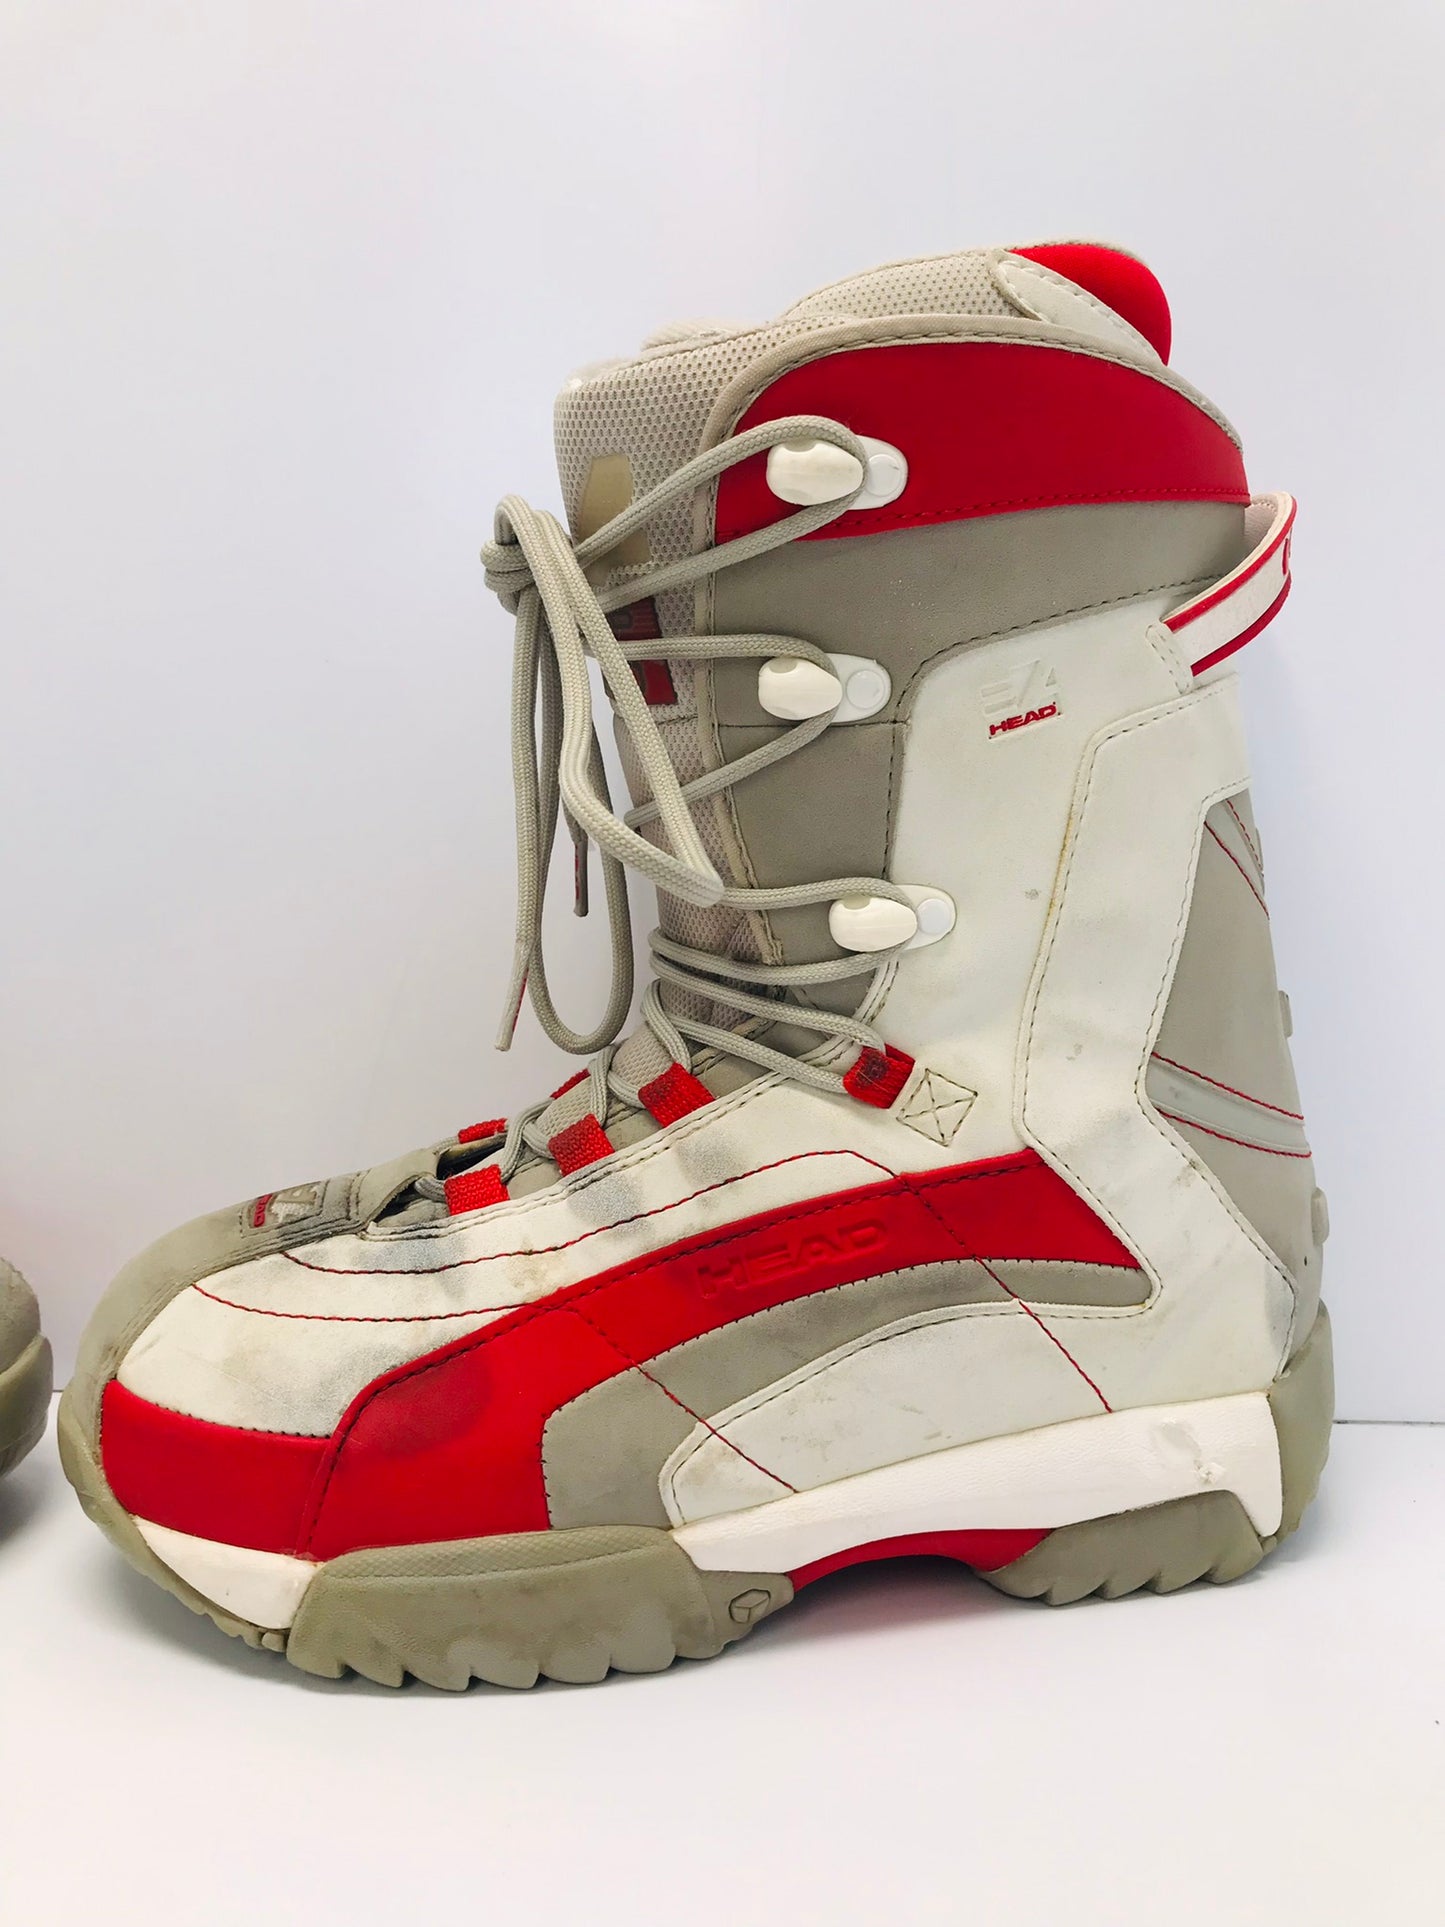 Snowboarding Boots Men's Size 8.5 Head White Grey Red Minor Marks